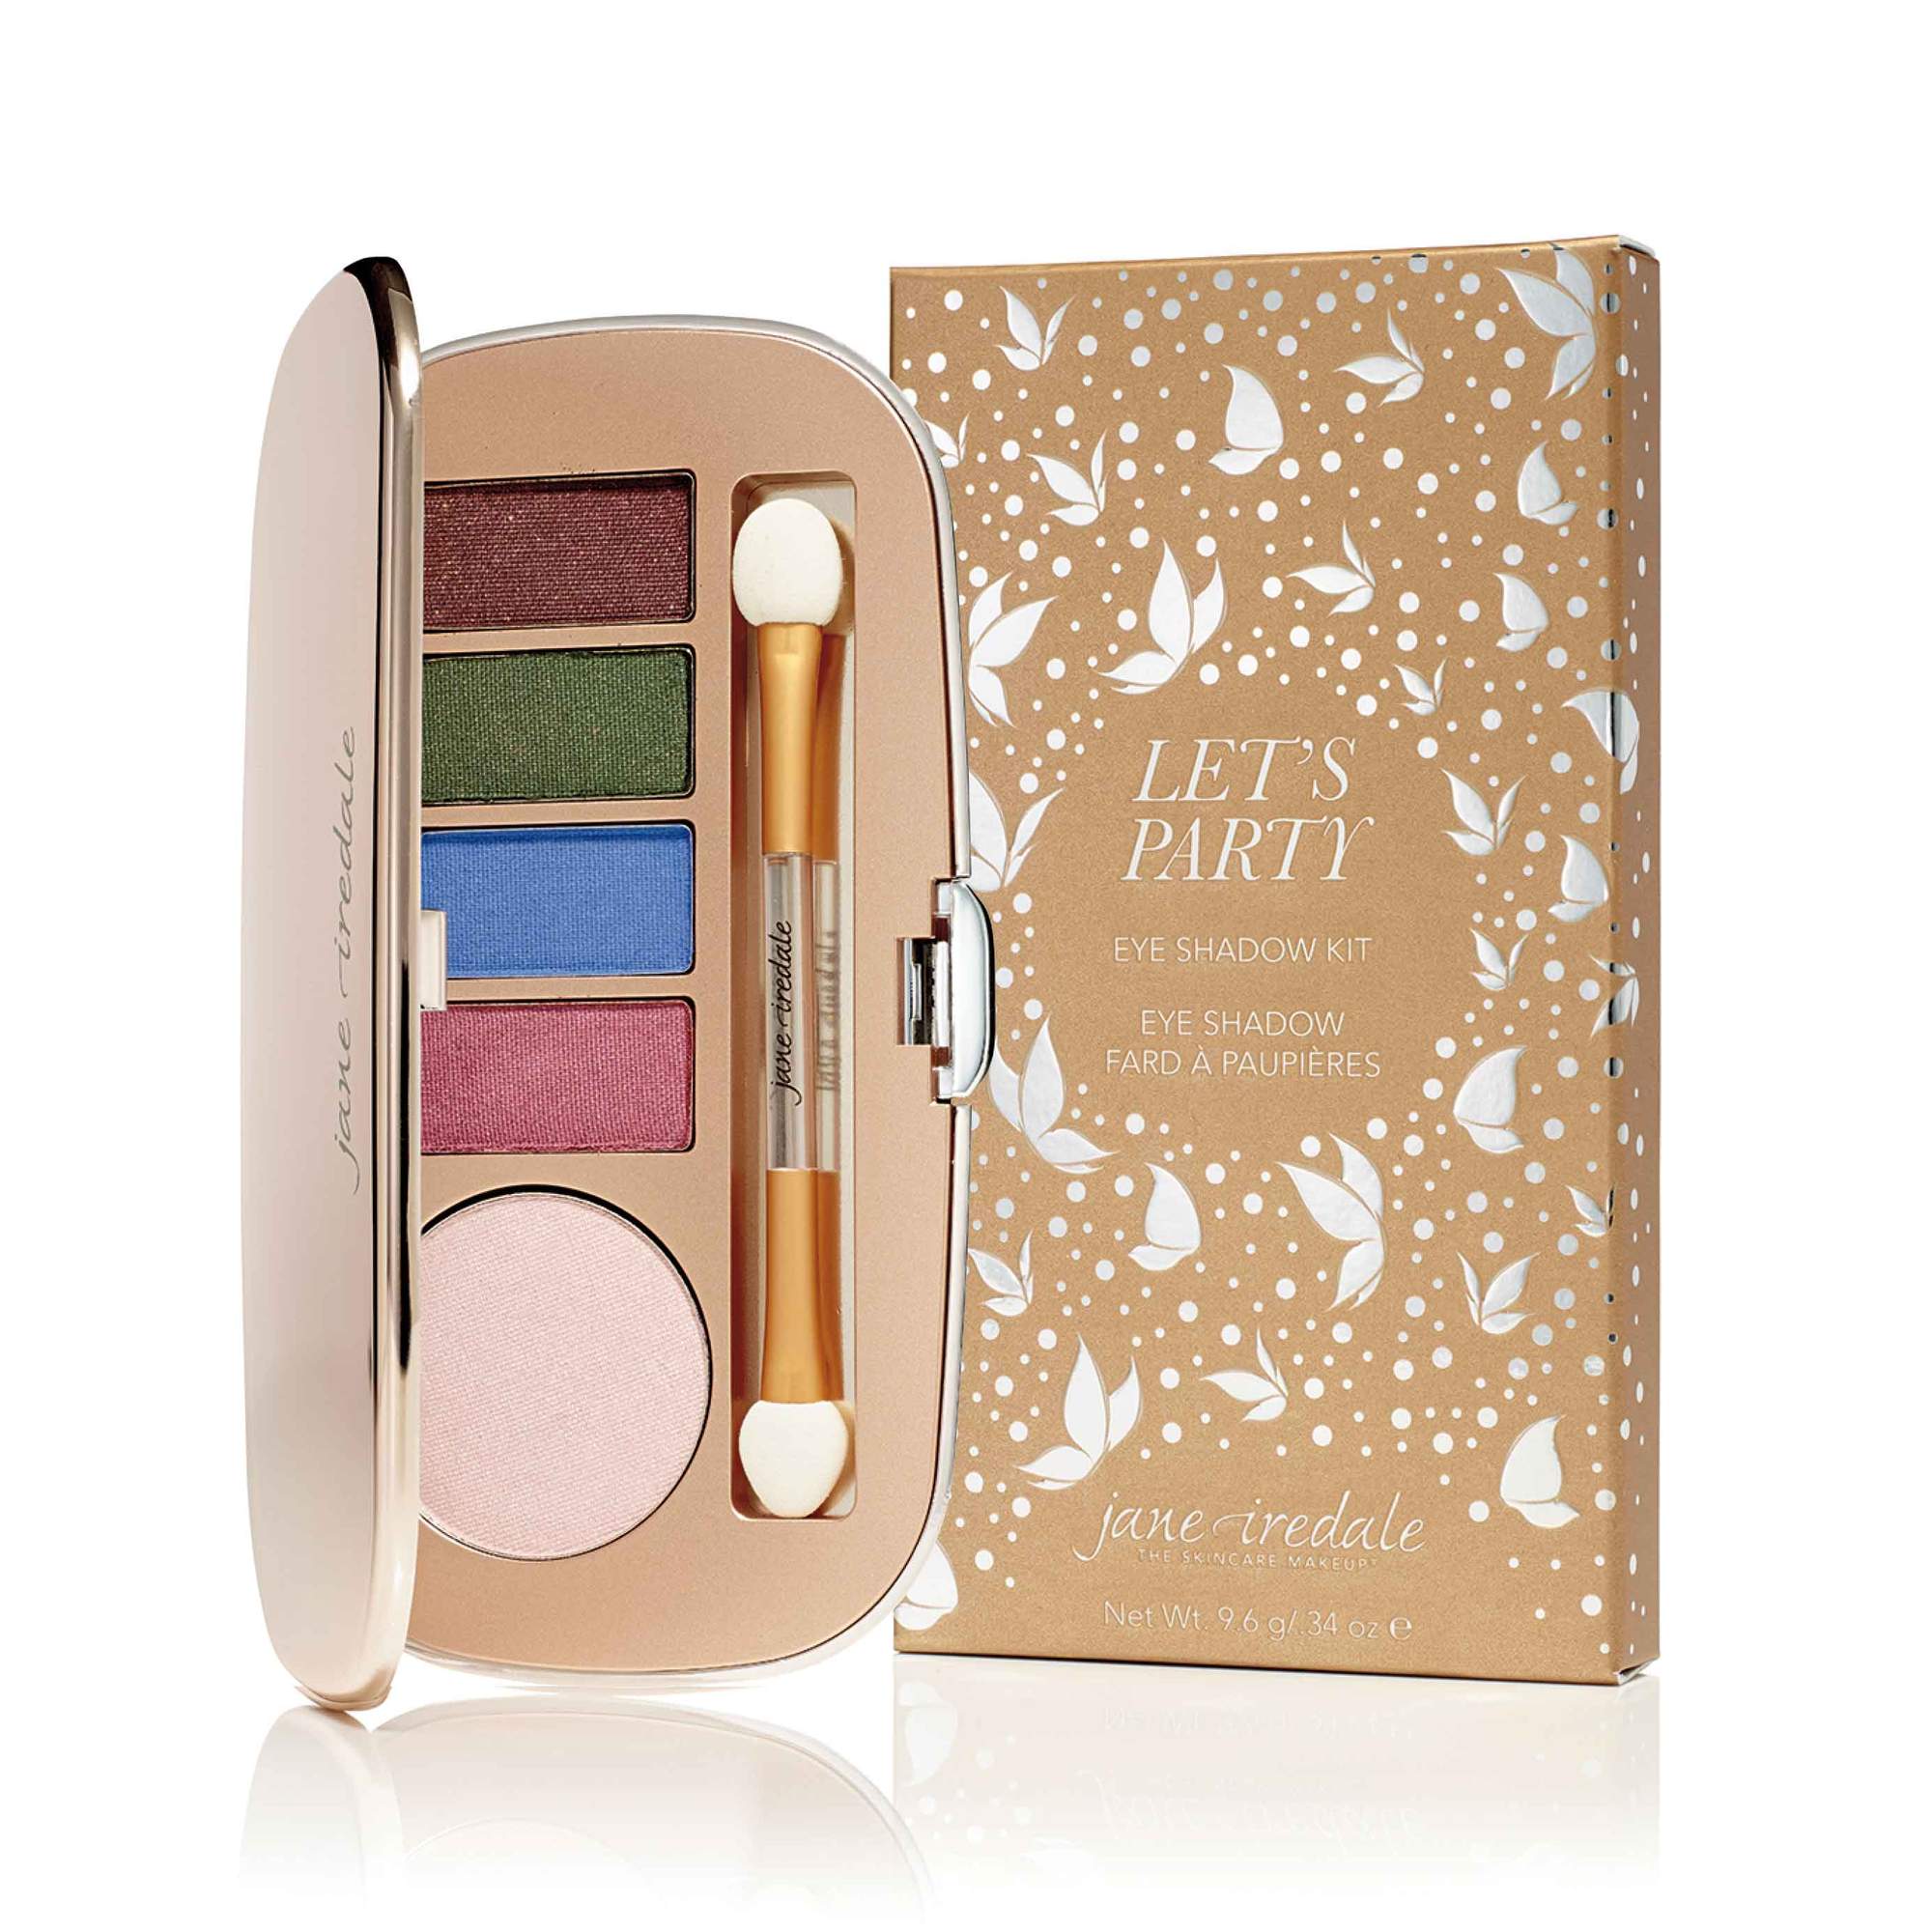 Let's Party Eye Shadow Kit